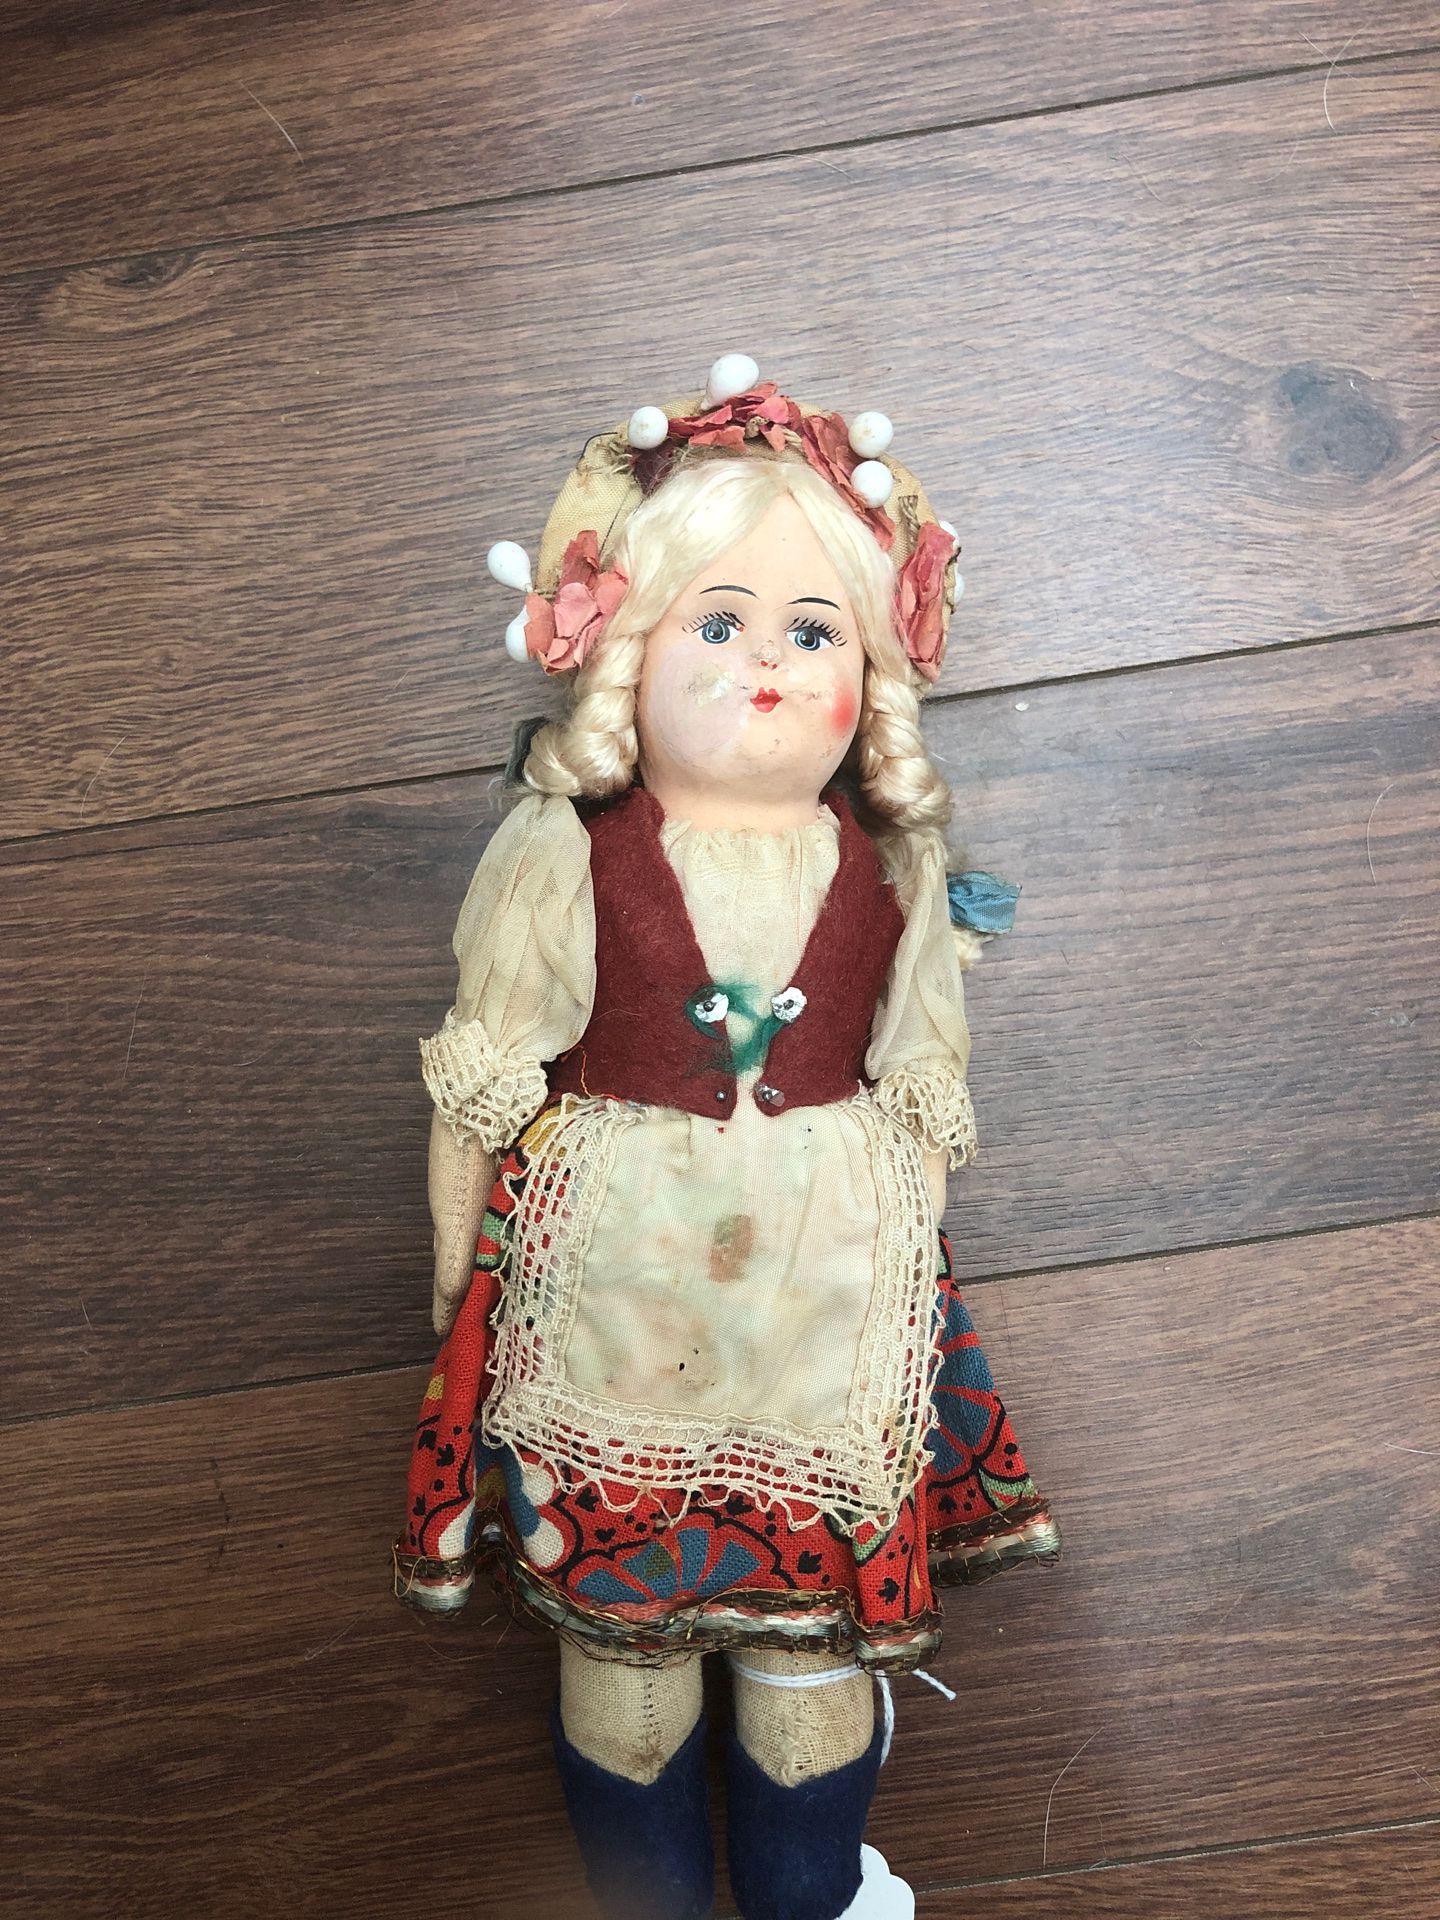 Antique cloth doll from the 1950s - European